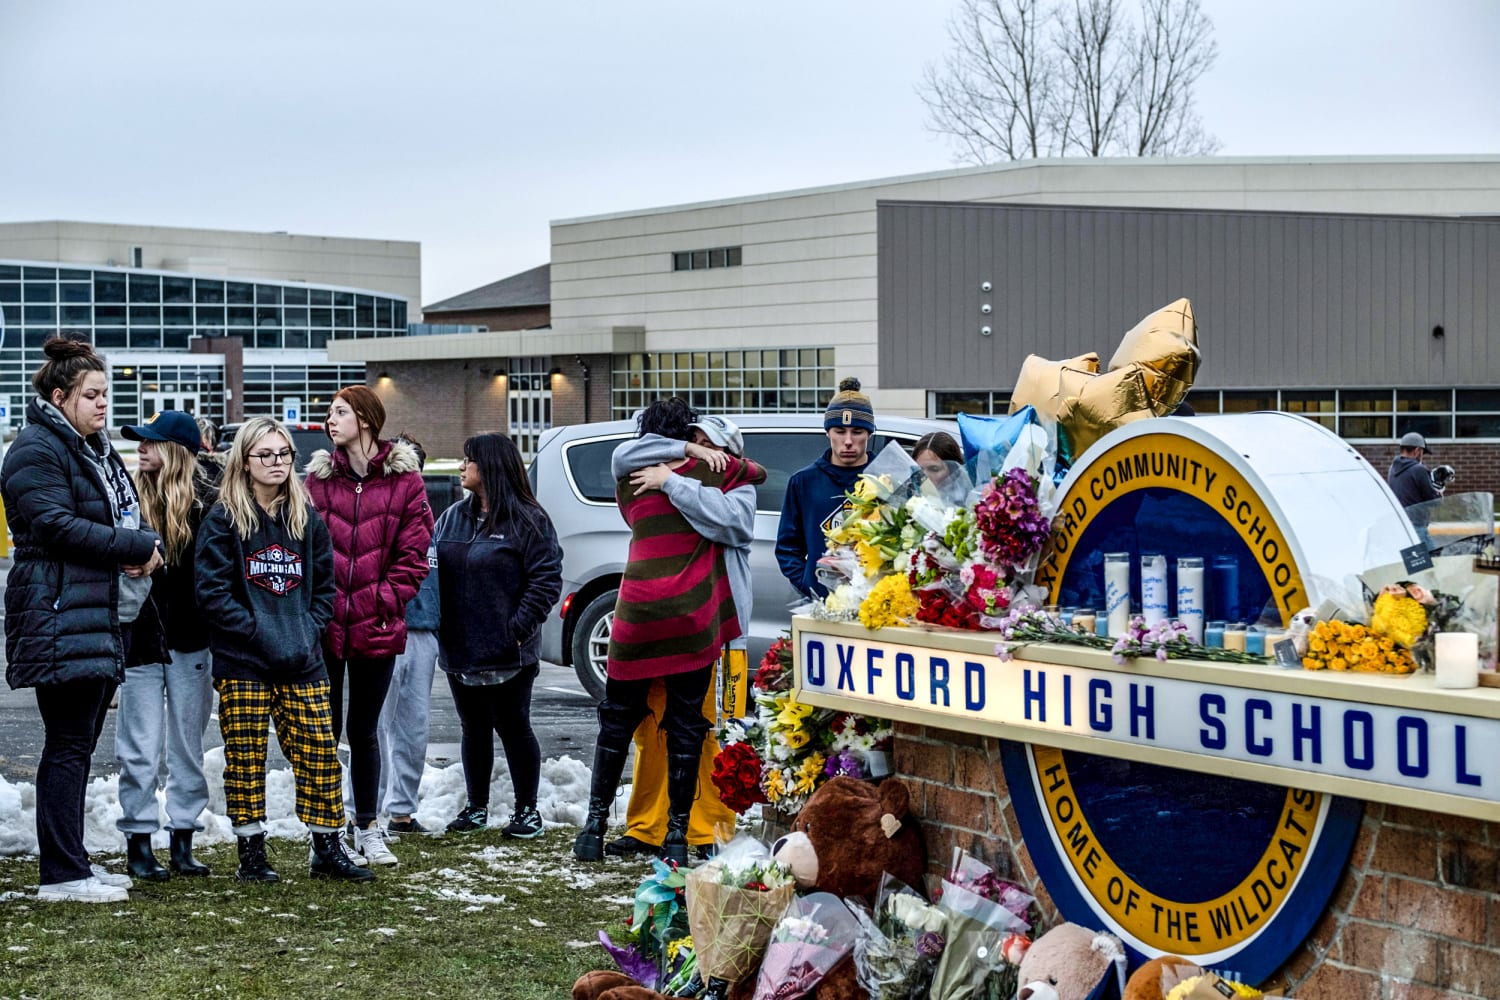 Parents of suspected Michigan H.S. shooter are charged with involuntary manslaughter